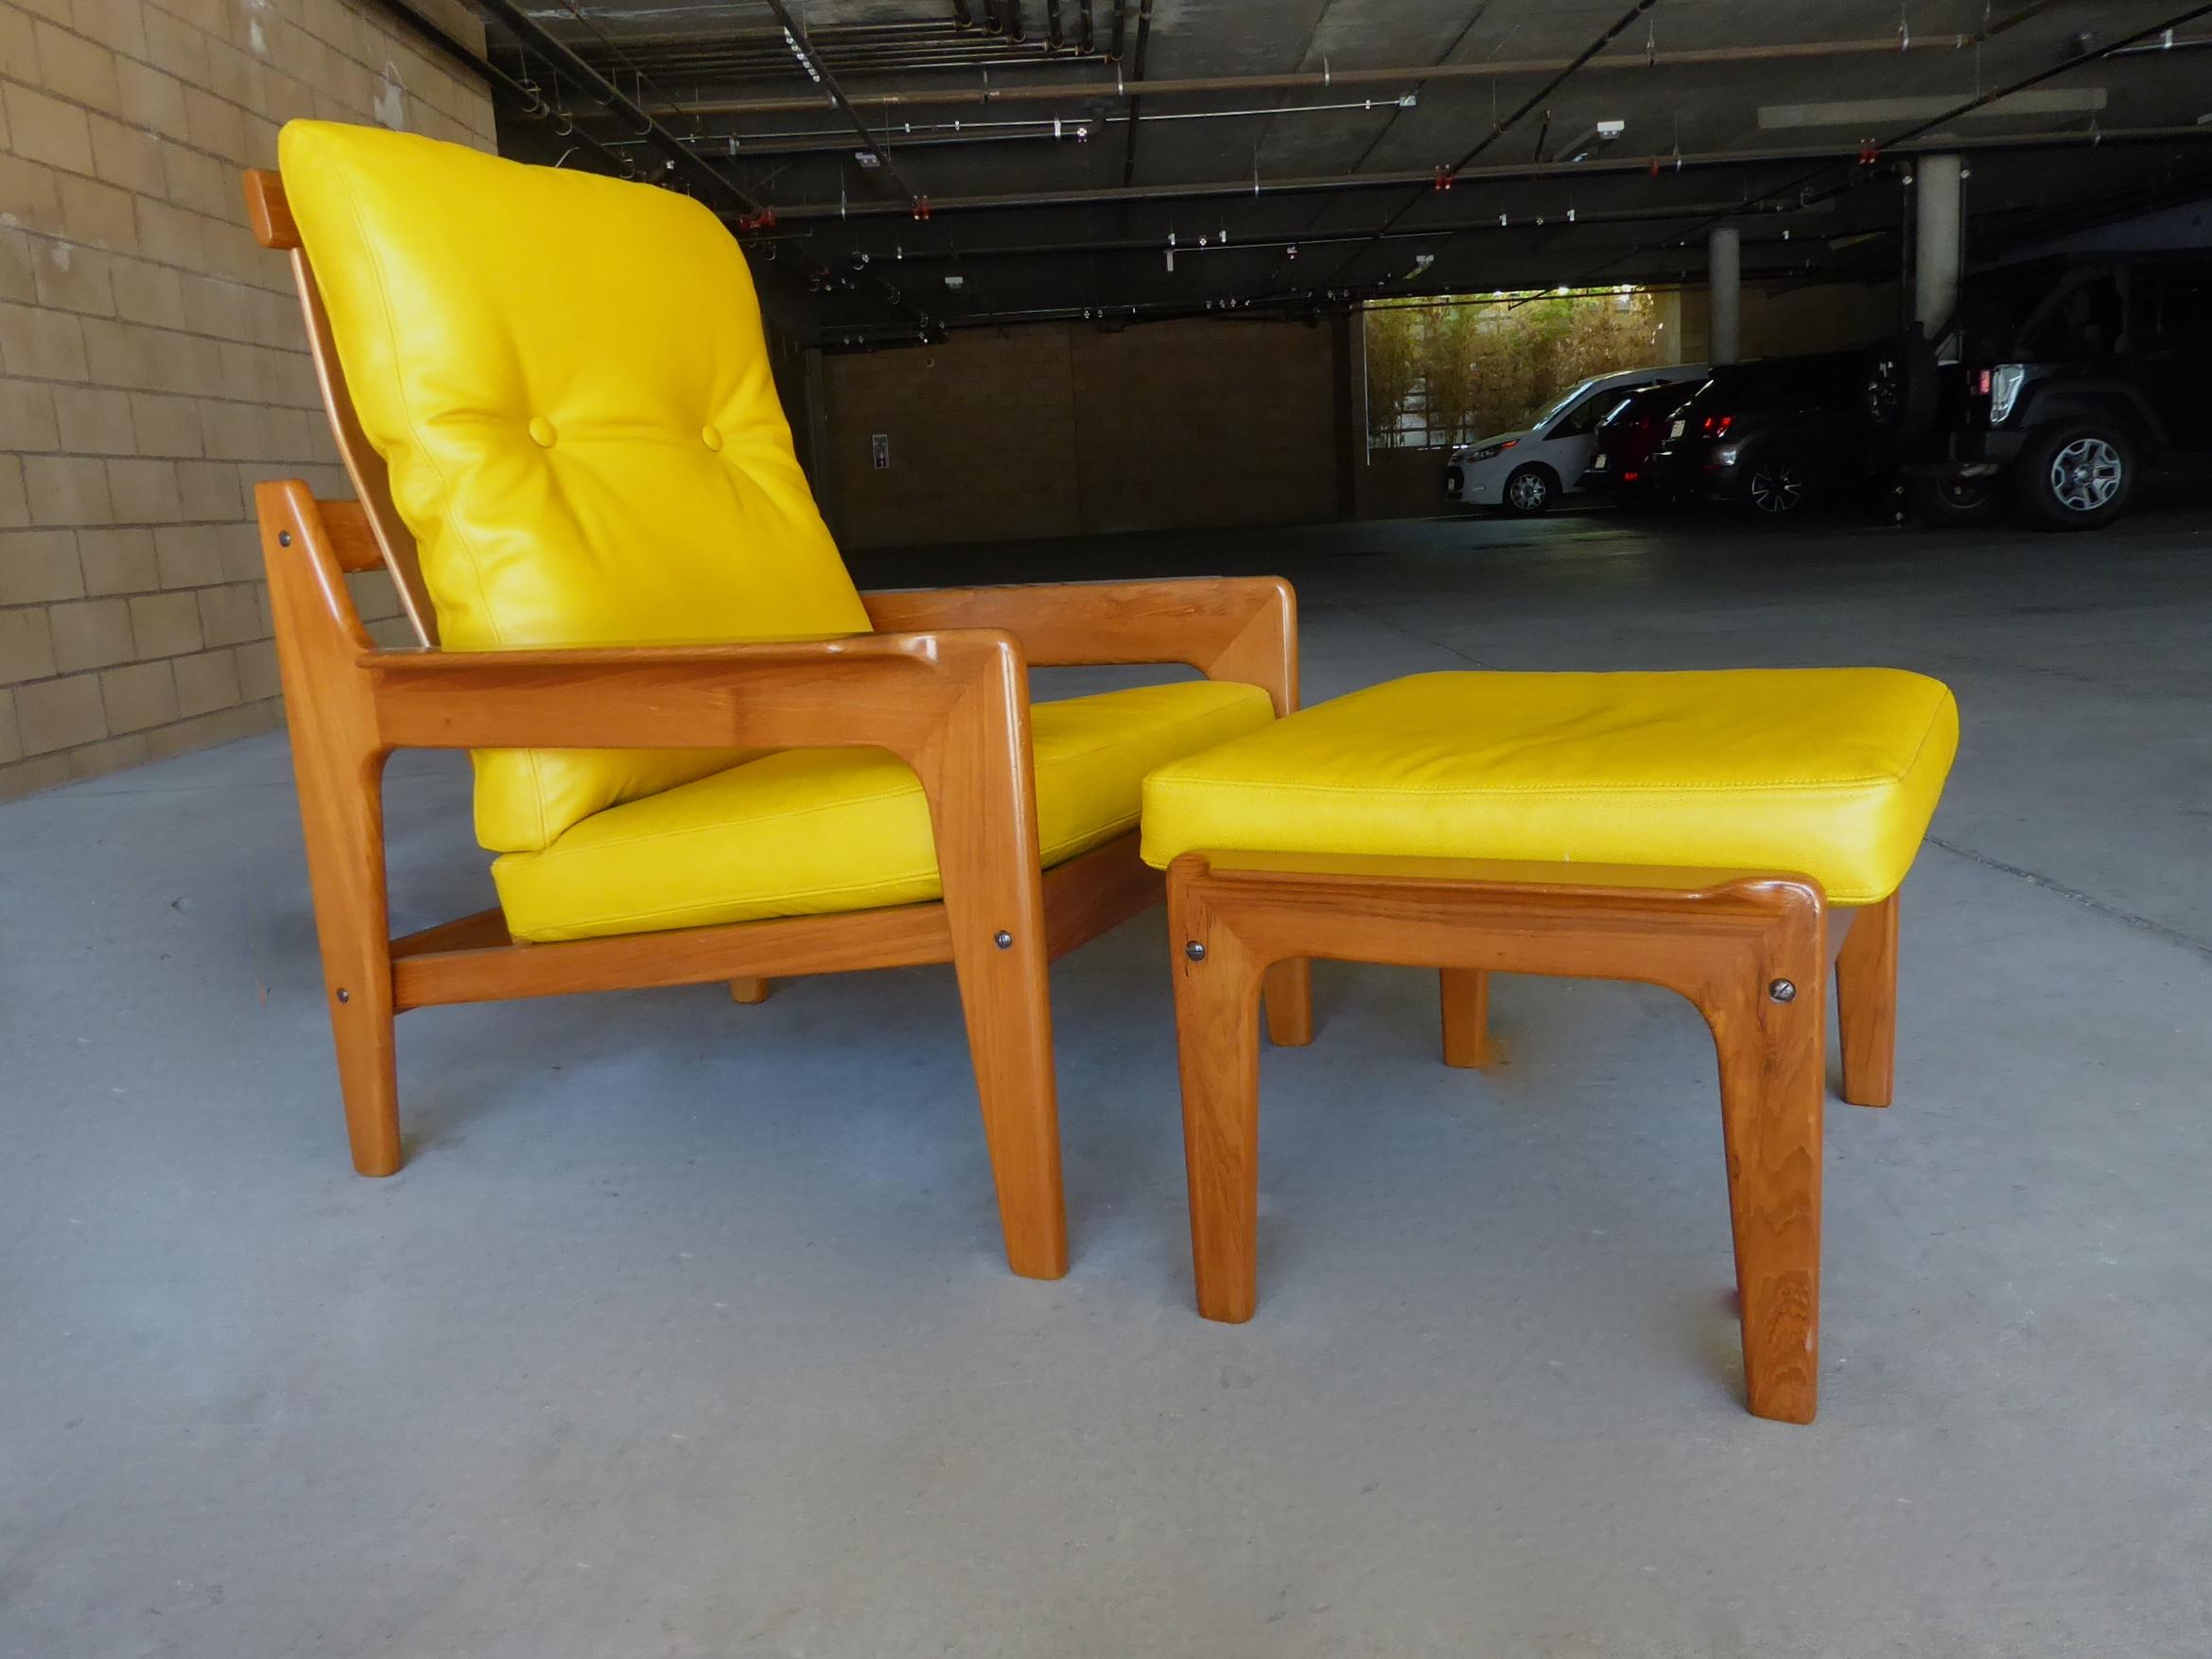 A Danish teakwood armchair and ottoman designed in the 1960s by Arne Wahl Iversen for Komfort Furniture. The set has been newly polished and reupholstered in a fine quality yellow leather. The Komfort label appears below the chair seat.
The